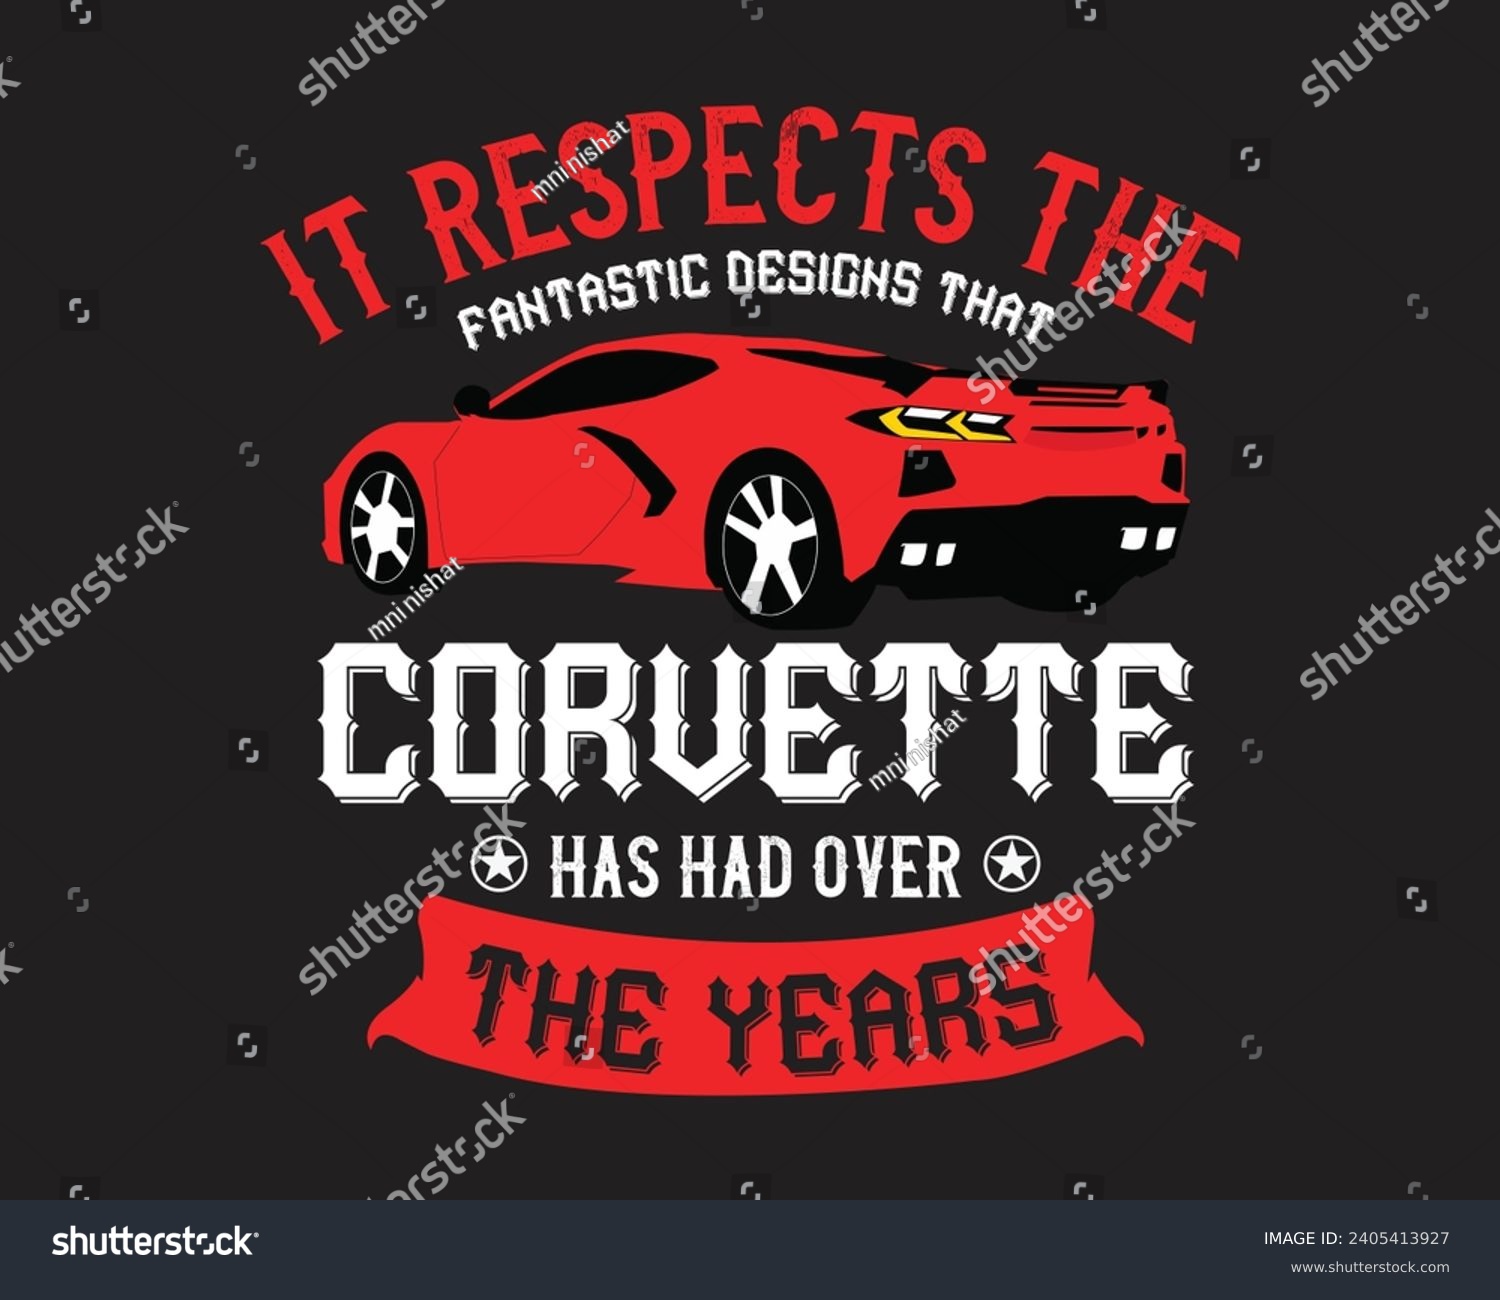 SVG of Are you looking for a fantastic designs that Corvette? svg